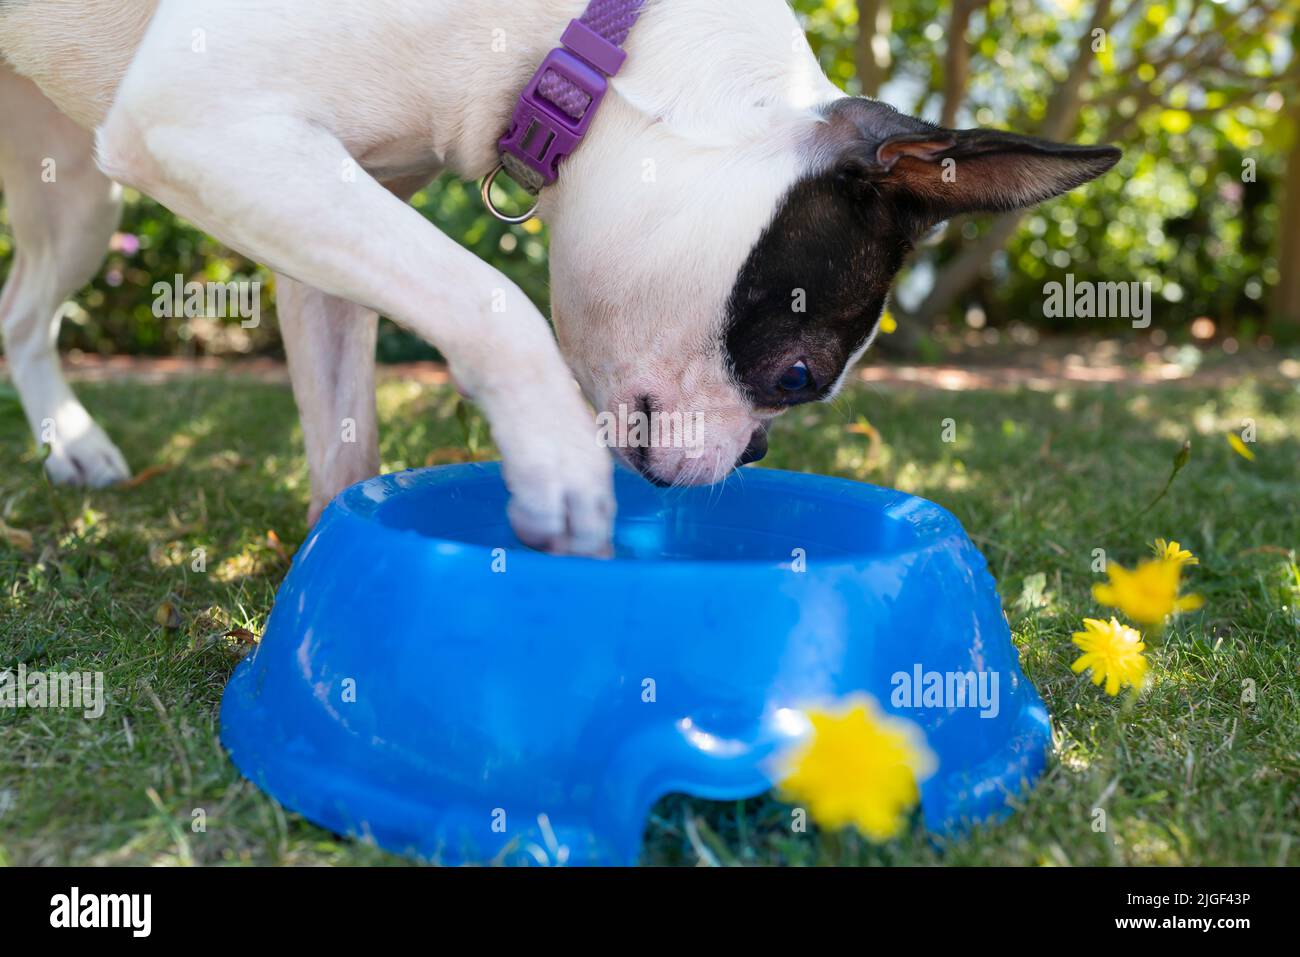 Boston Terrier dog playing with water in a bowl using a paw. She is outside garden on grass with danelions. Stock Photo